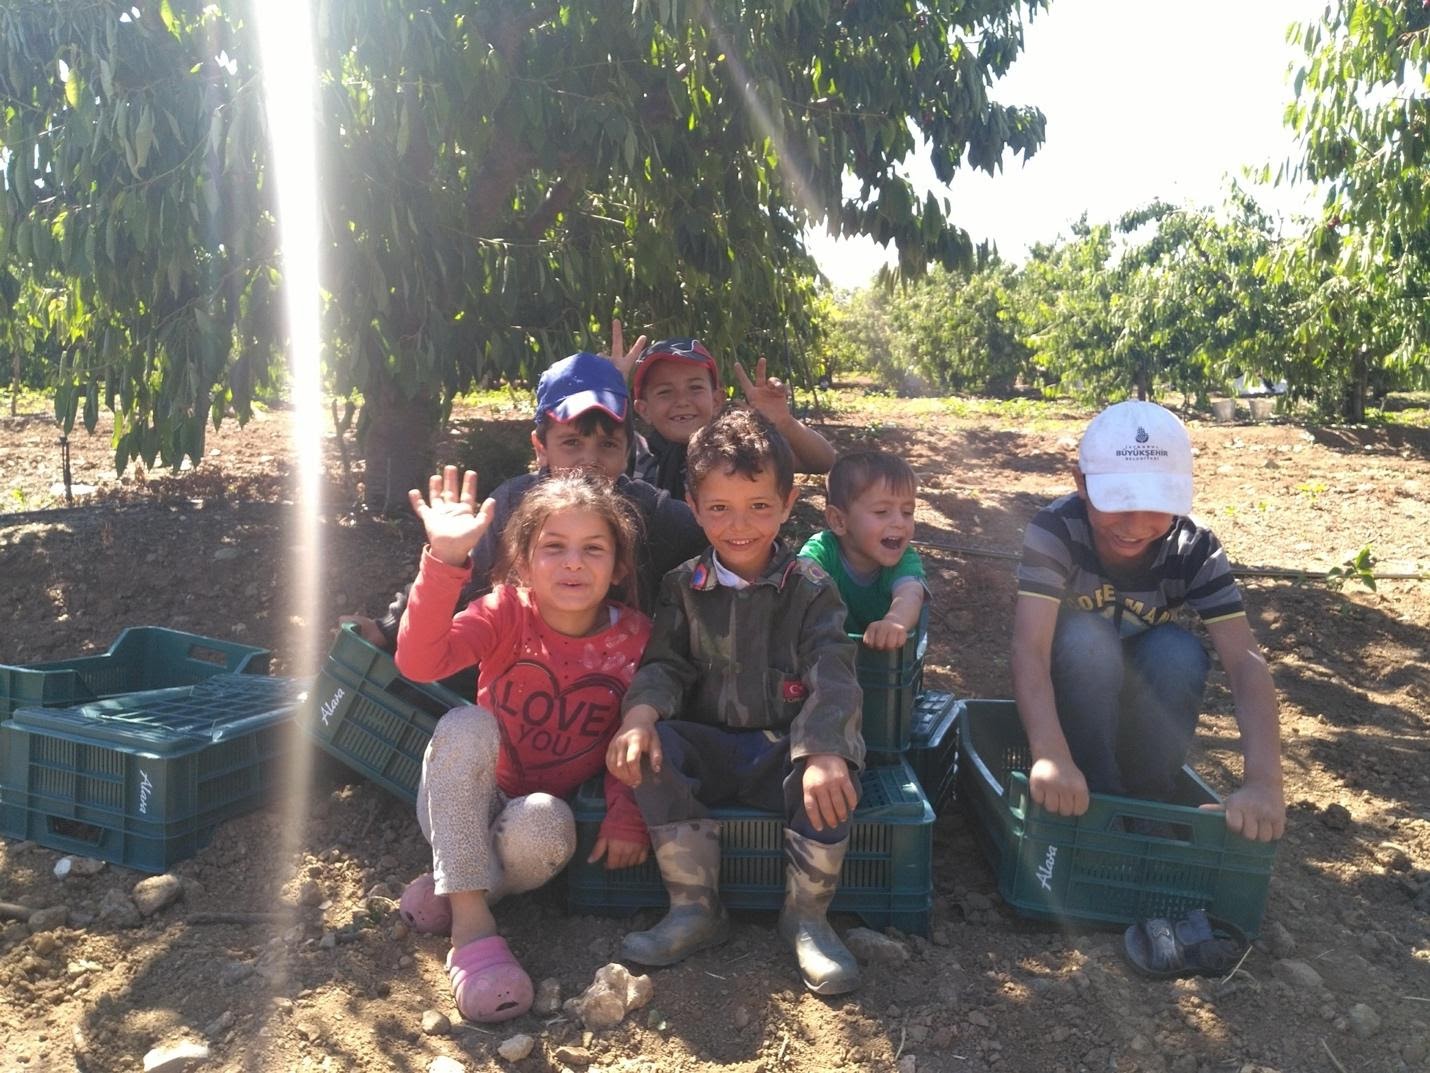 six preschool/kindergarten aged kids smiling, waving and holding up their fingers to the camera, making toys out of fruit crates.